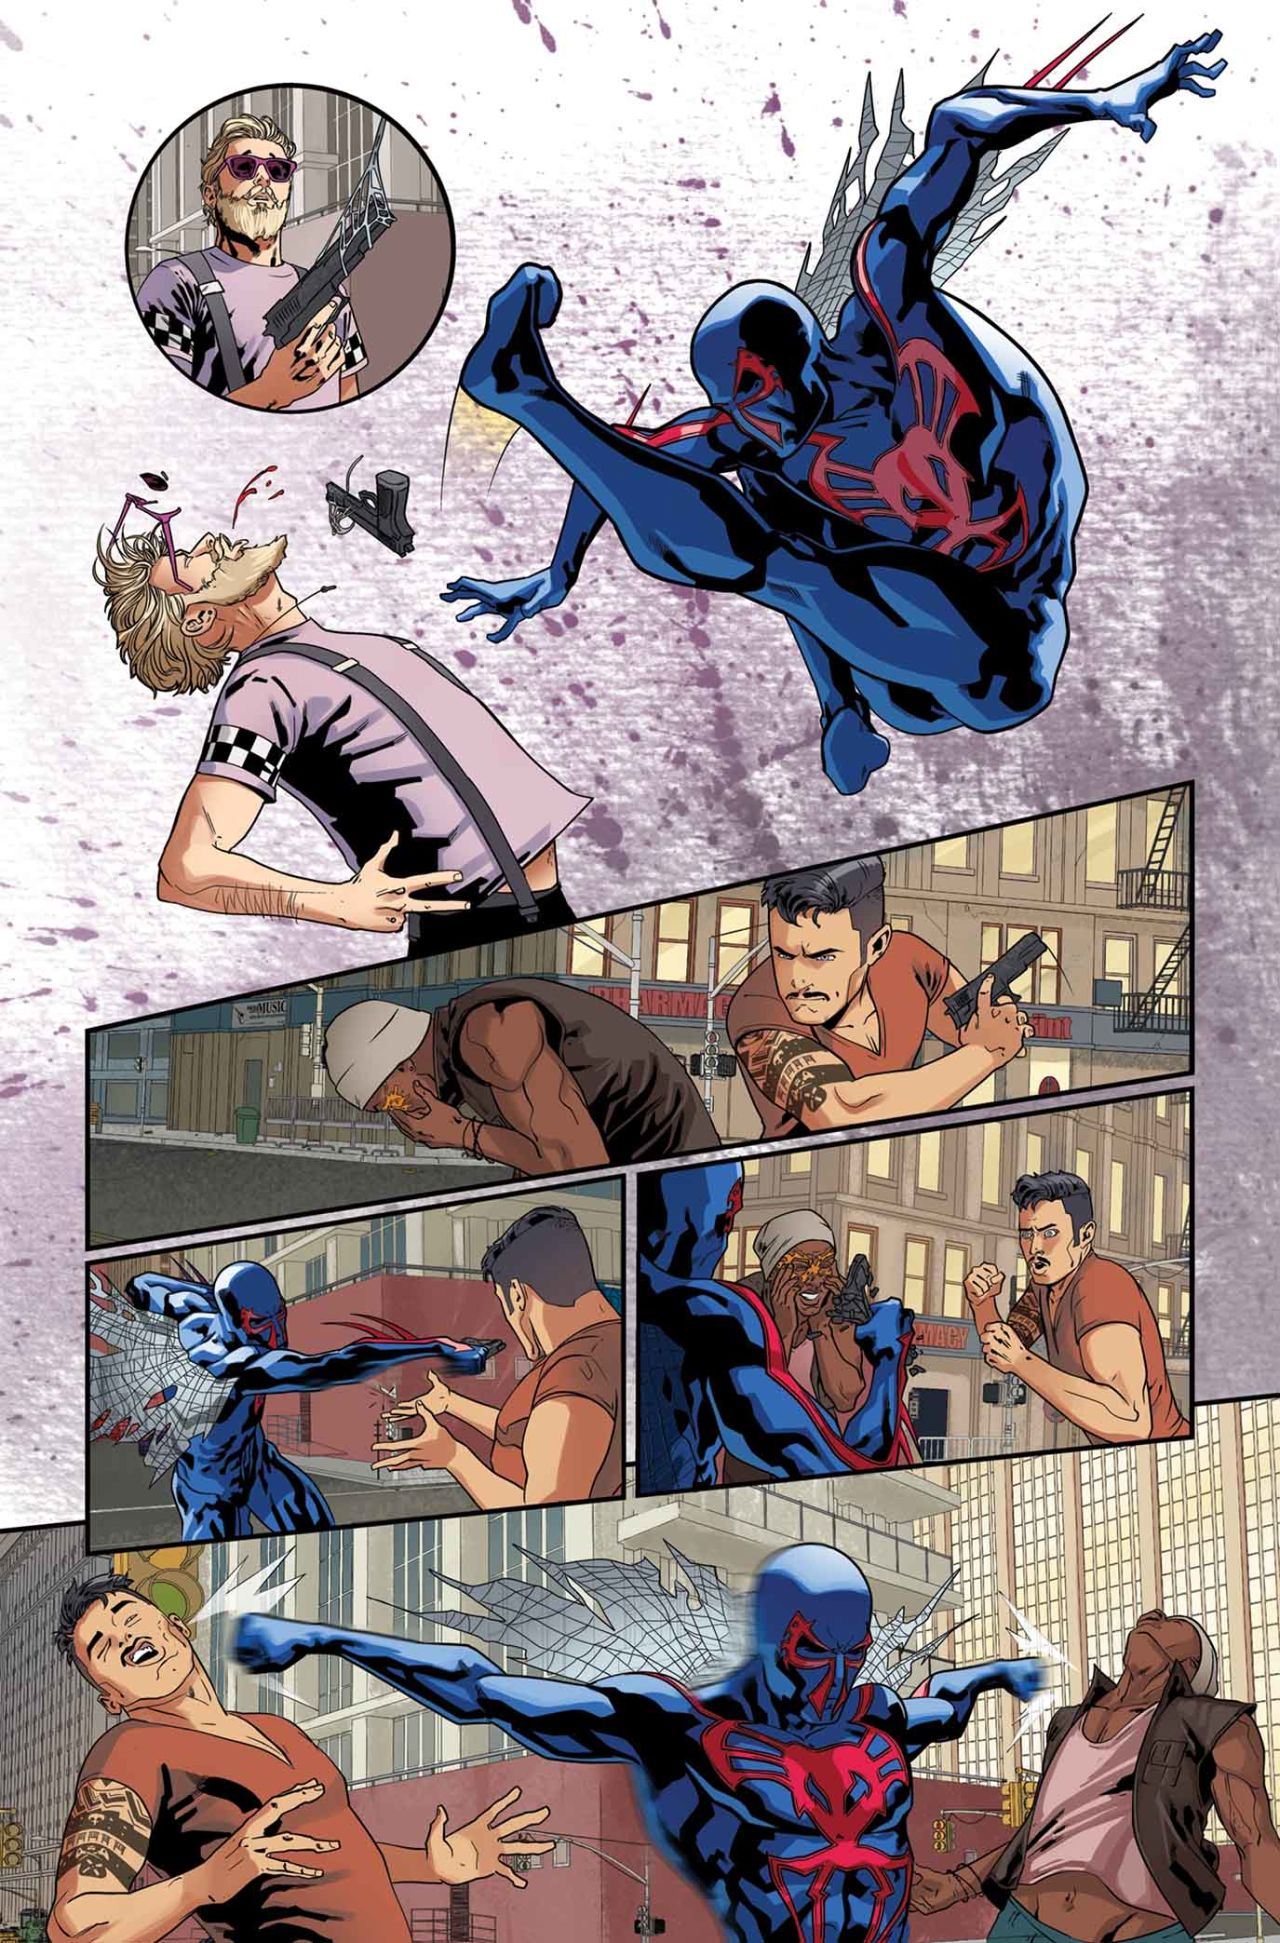 More of the "Spider-Man 2099" story in "Amazing Spider-Man" #1.